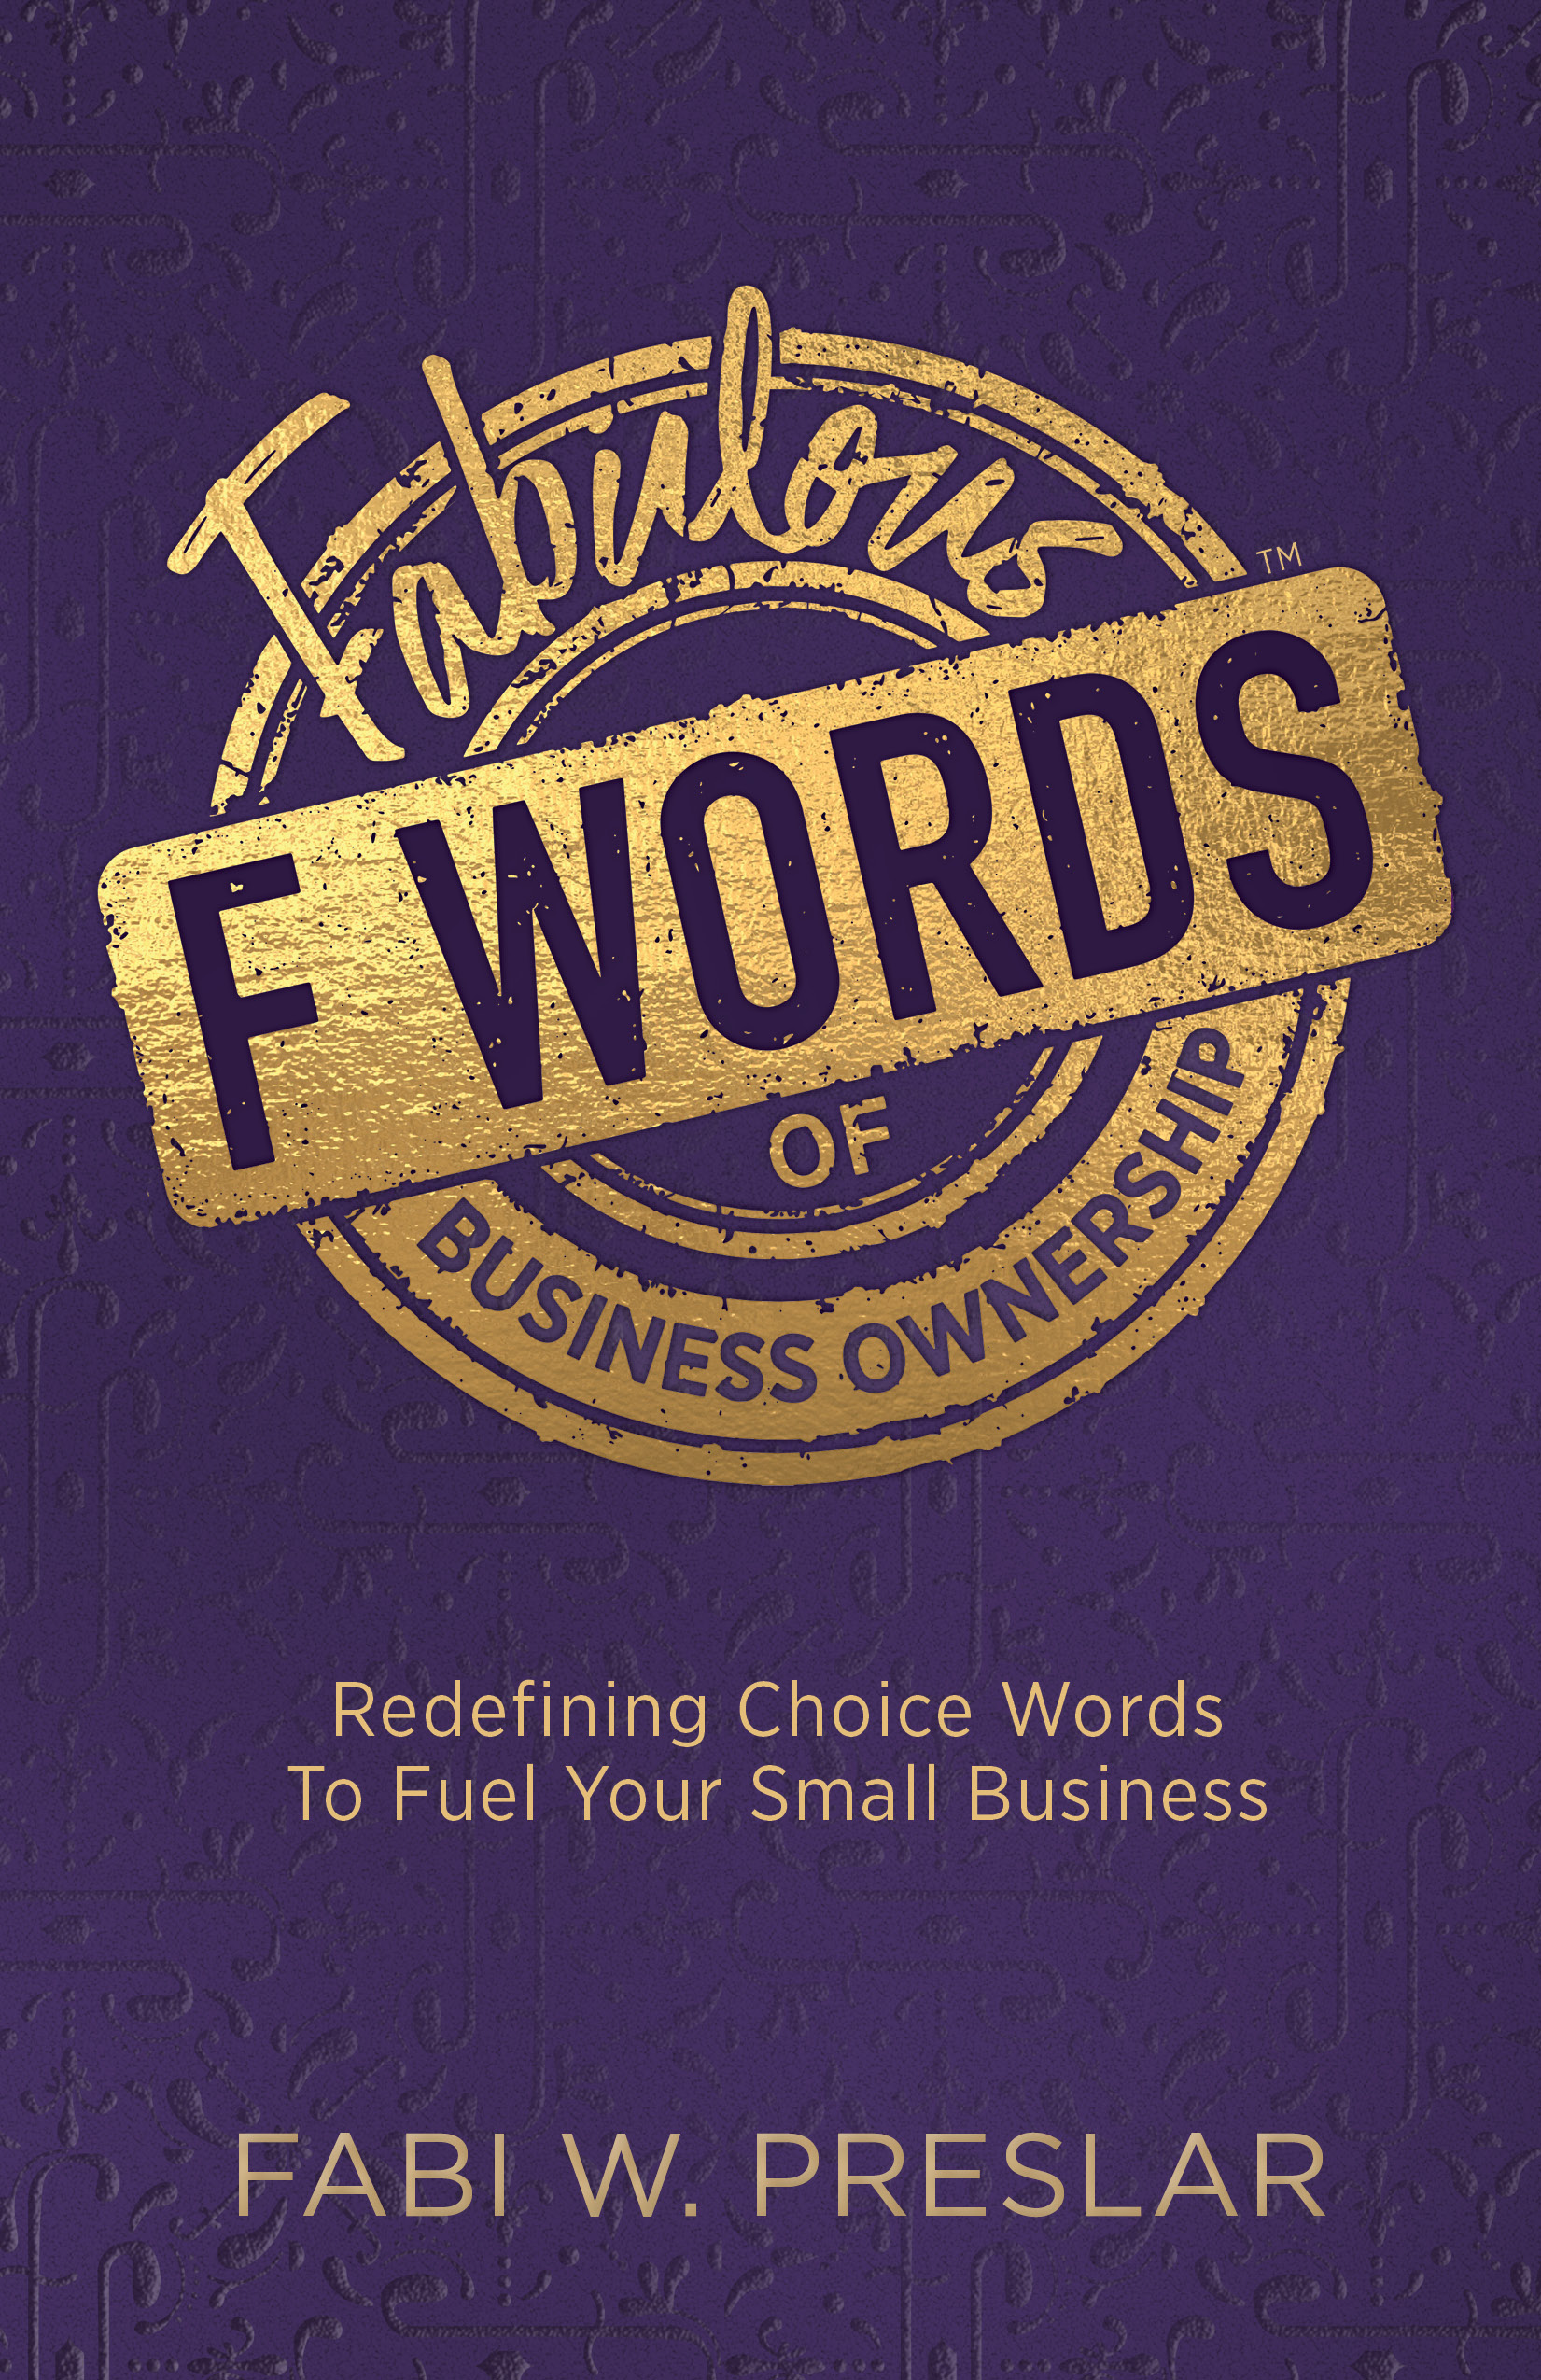 Fabulous F Words of Business Ownership: Redefining Choice Words to Fuel Your Small Business